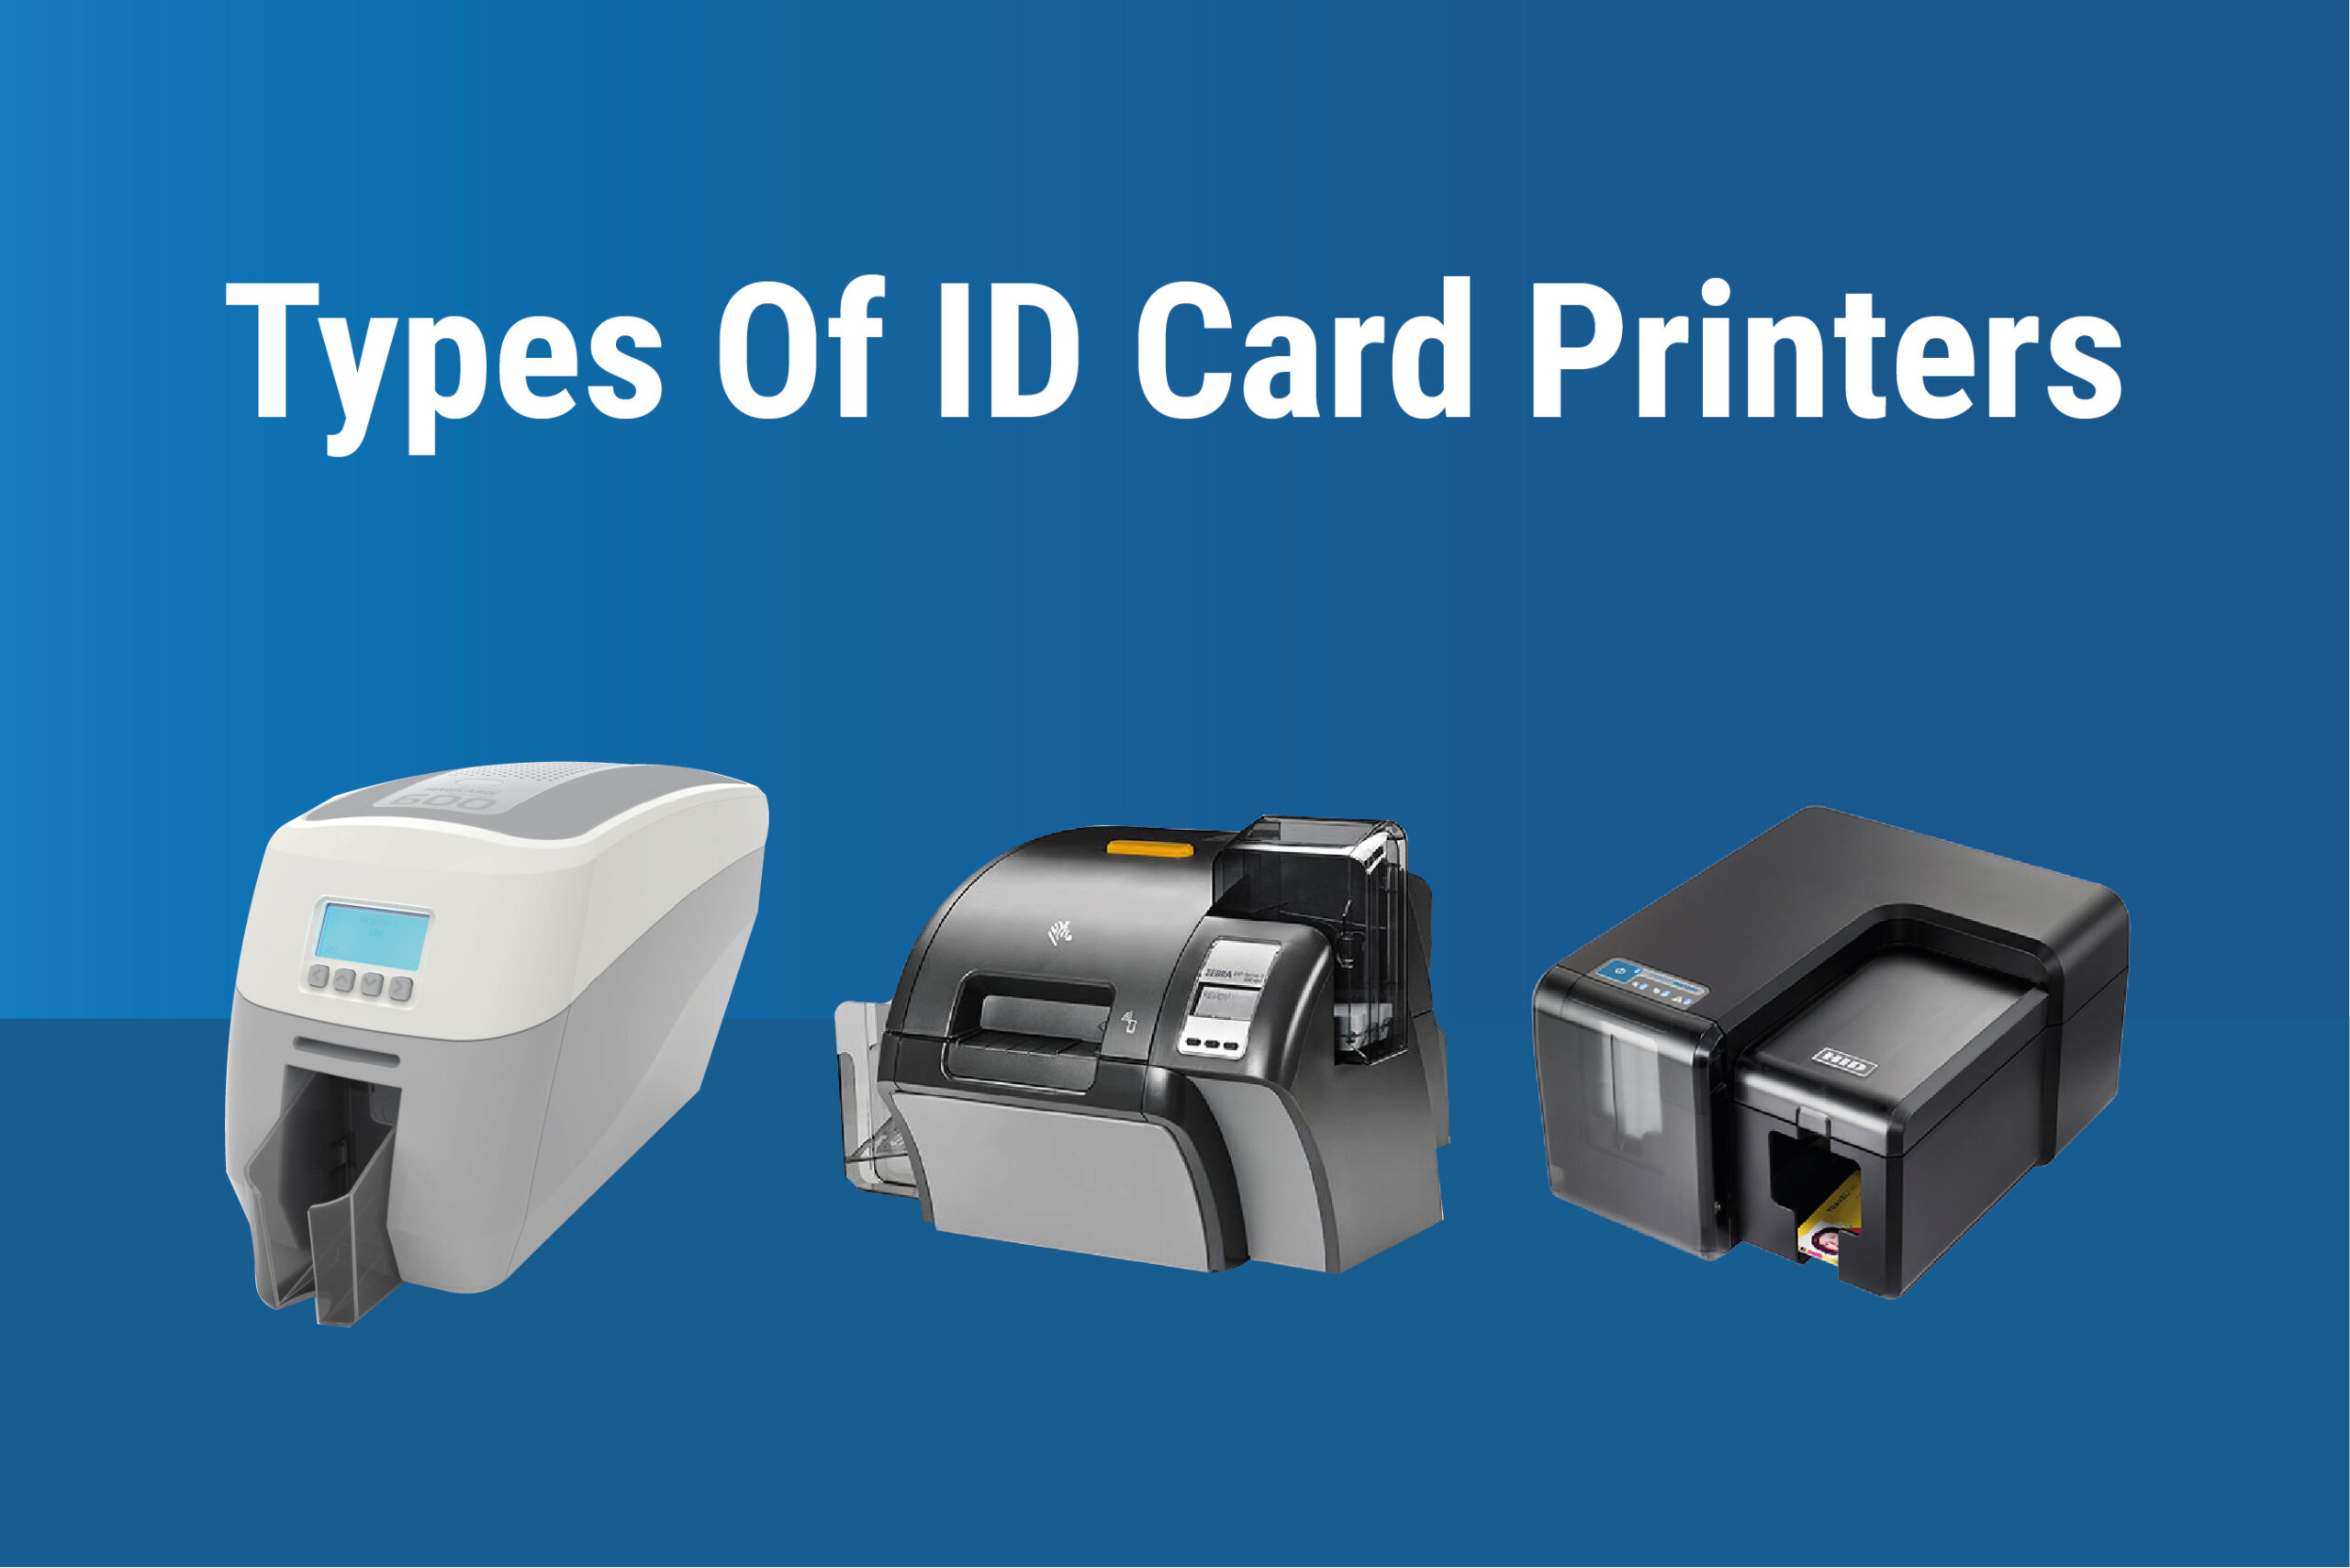 The Types of ID Card Printers, Explained